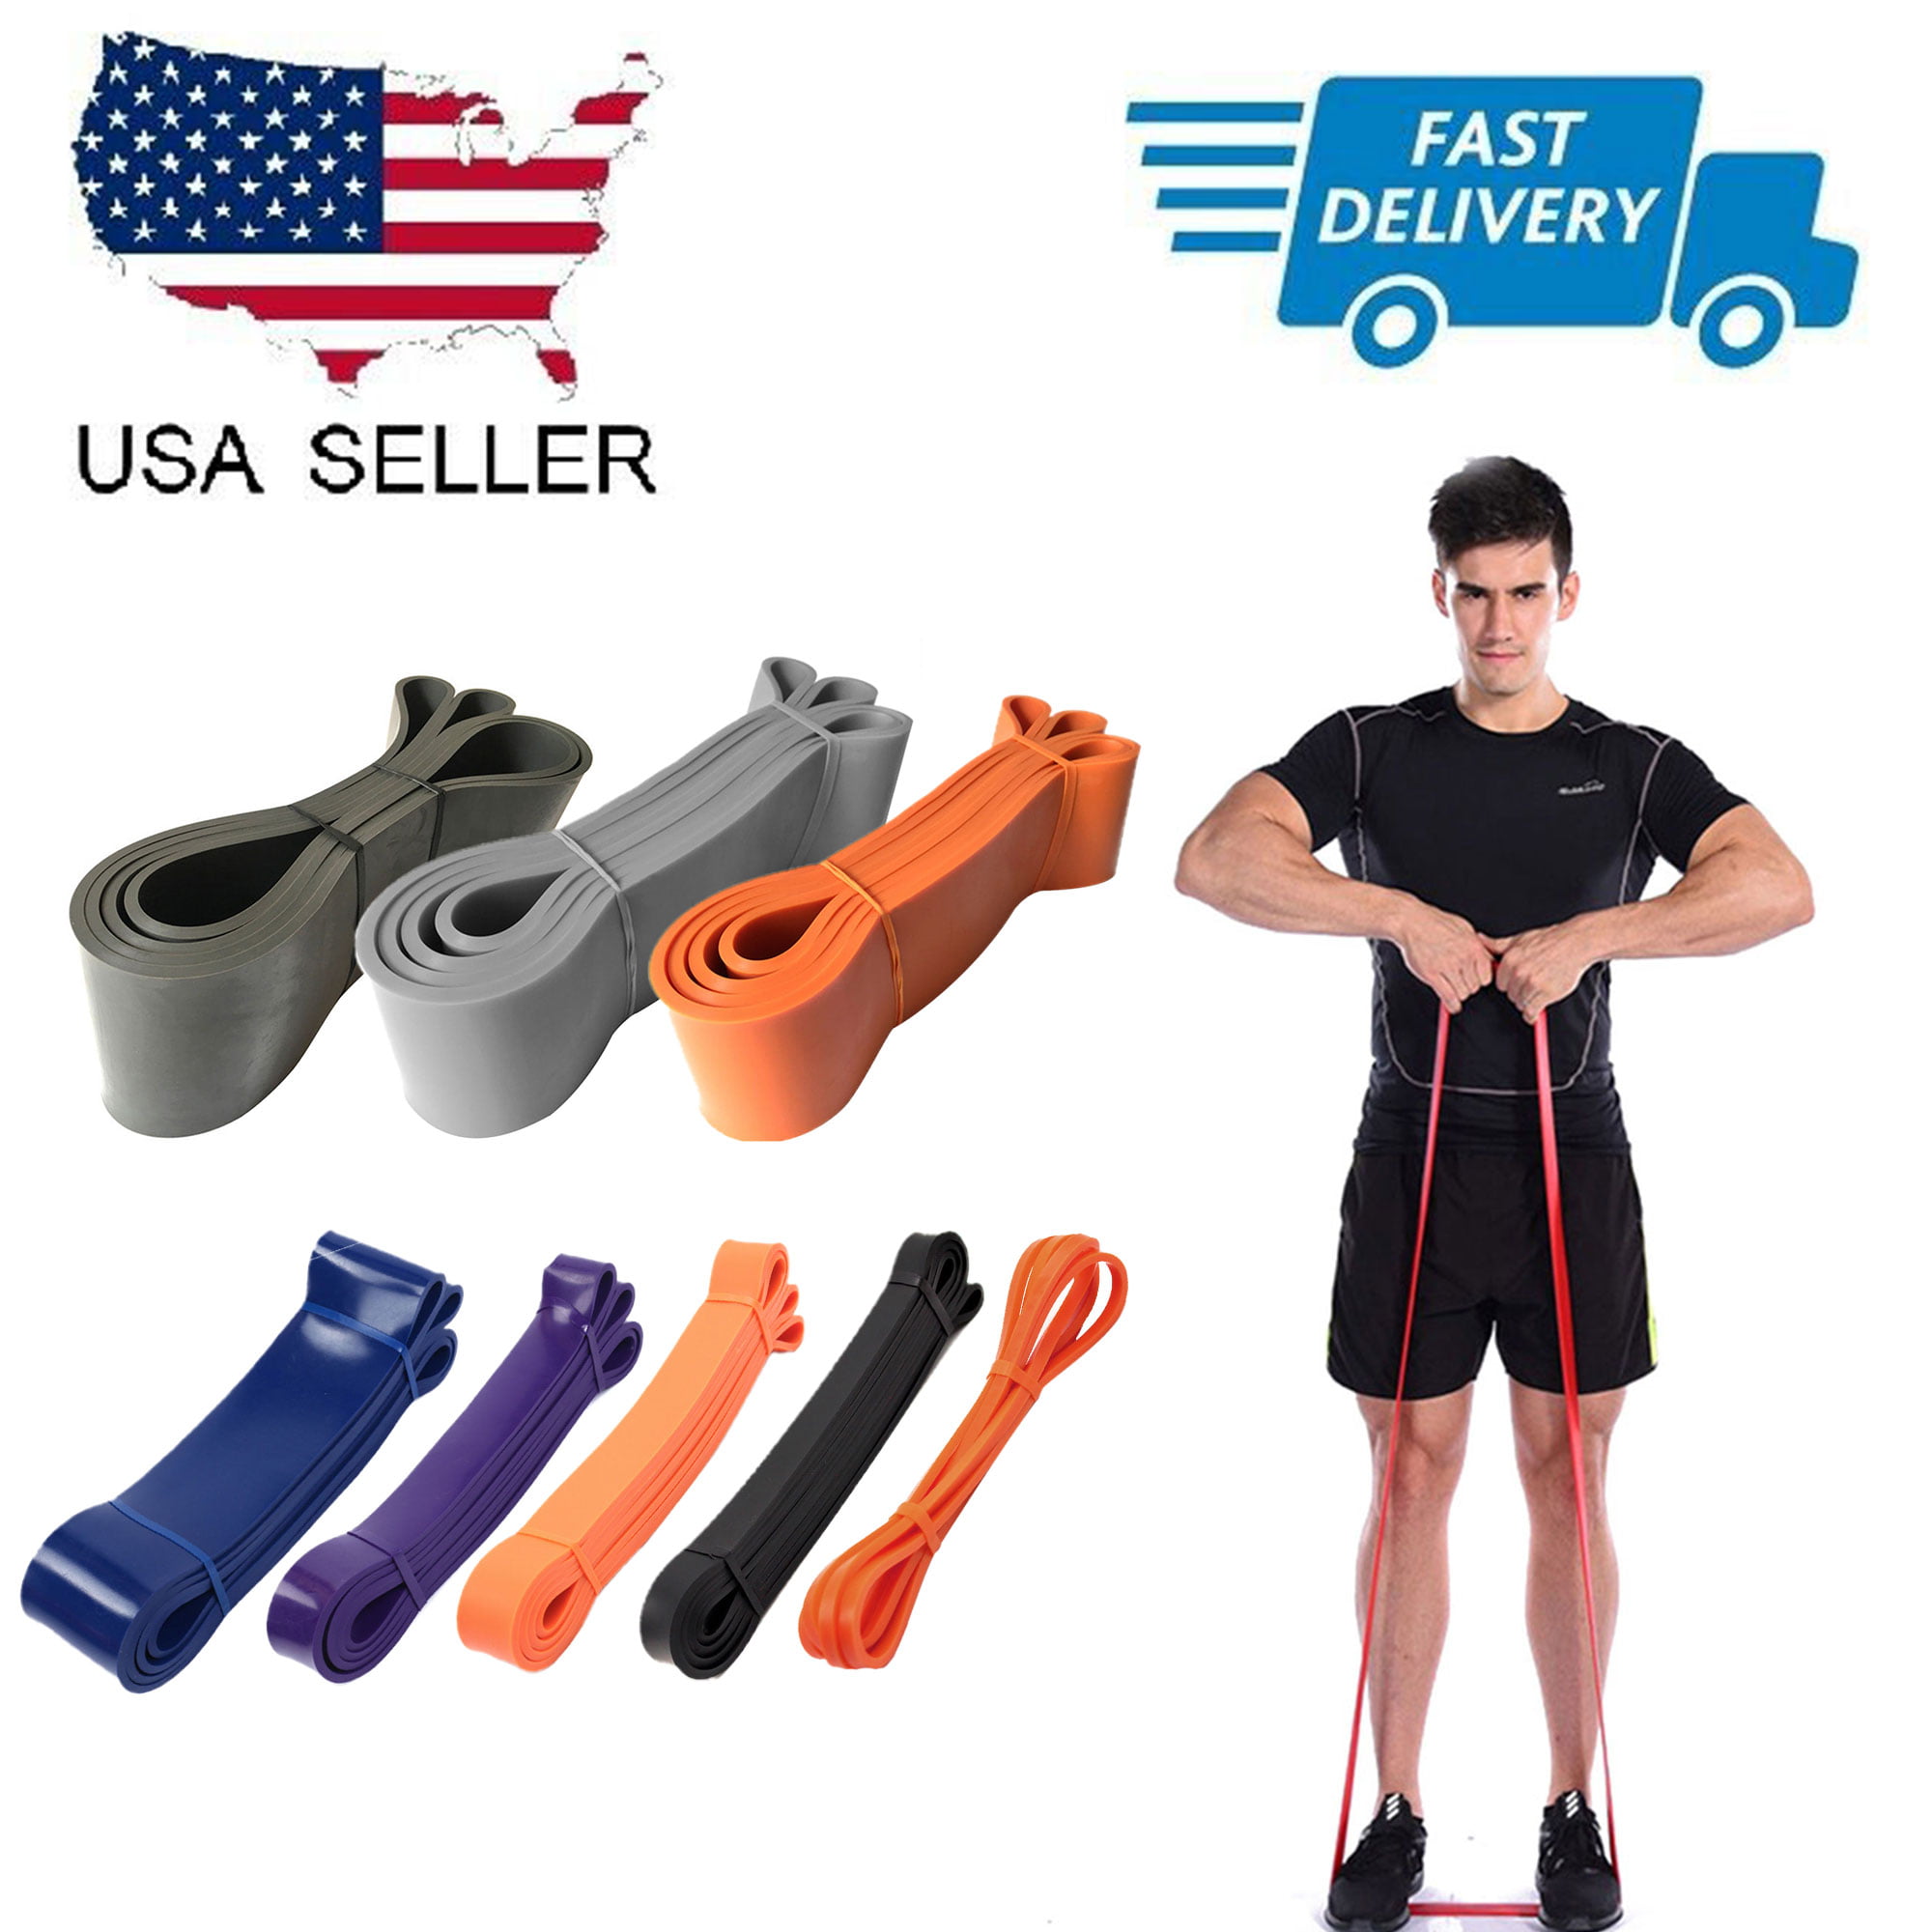 Details about   Heavy Duty Resistance Bands Loop Power Gym Fitness Exercise Yoga Workout Pilates 